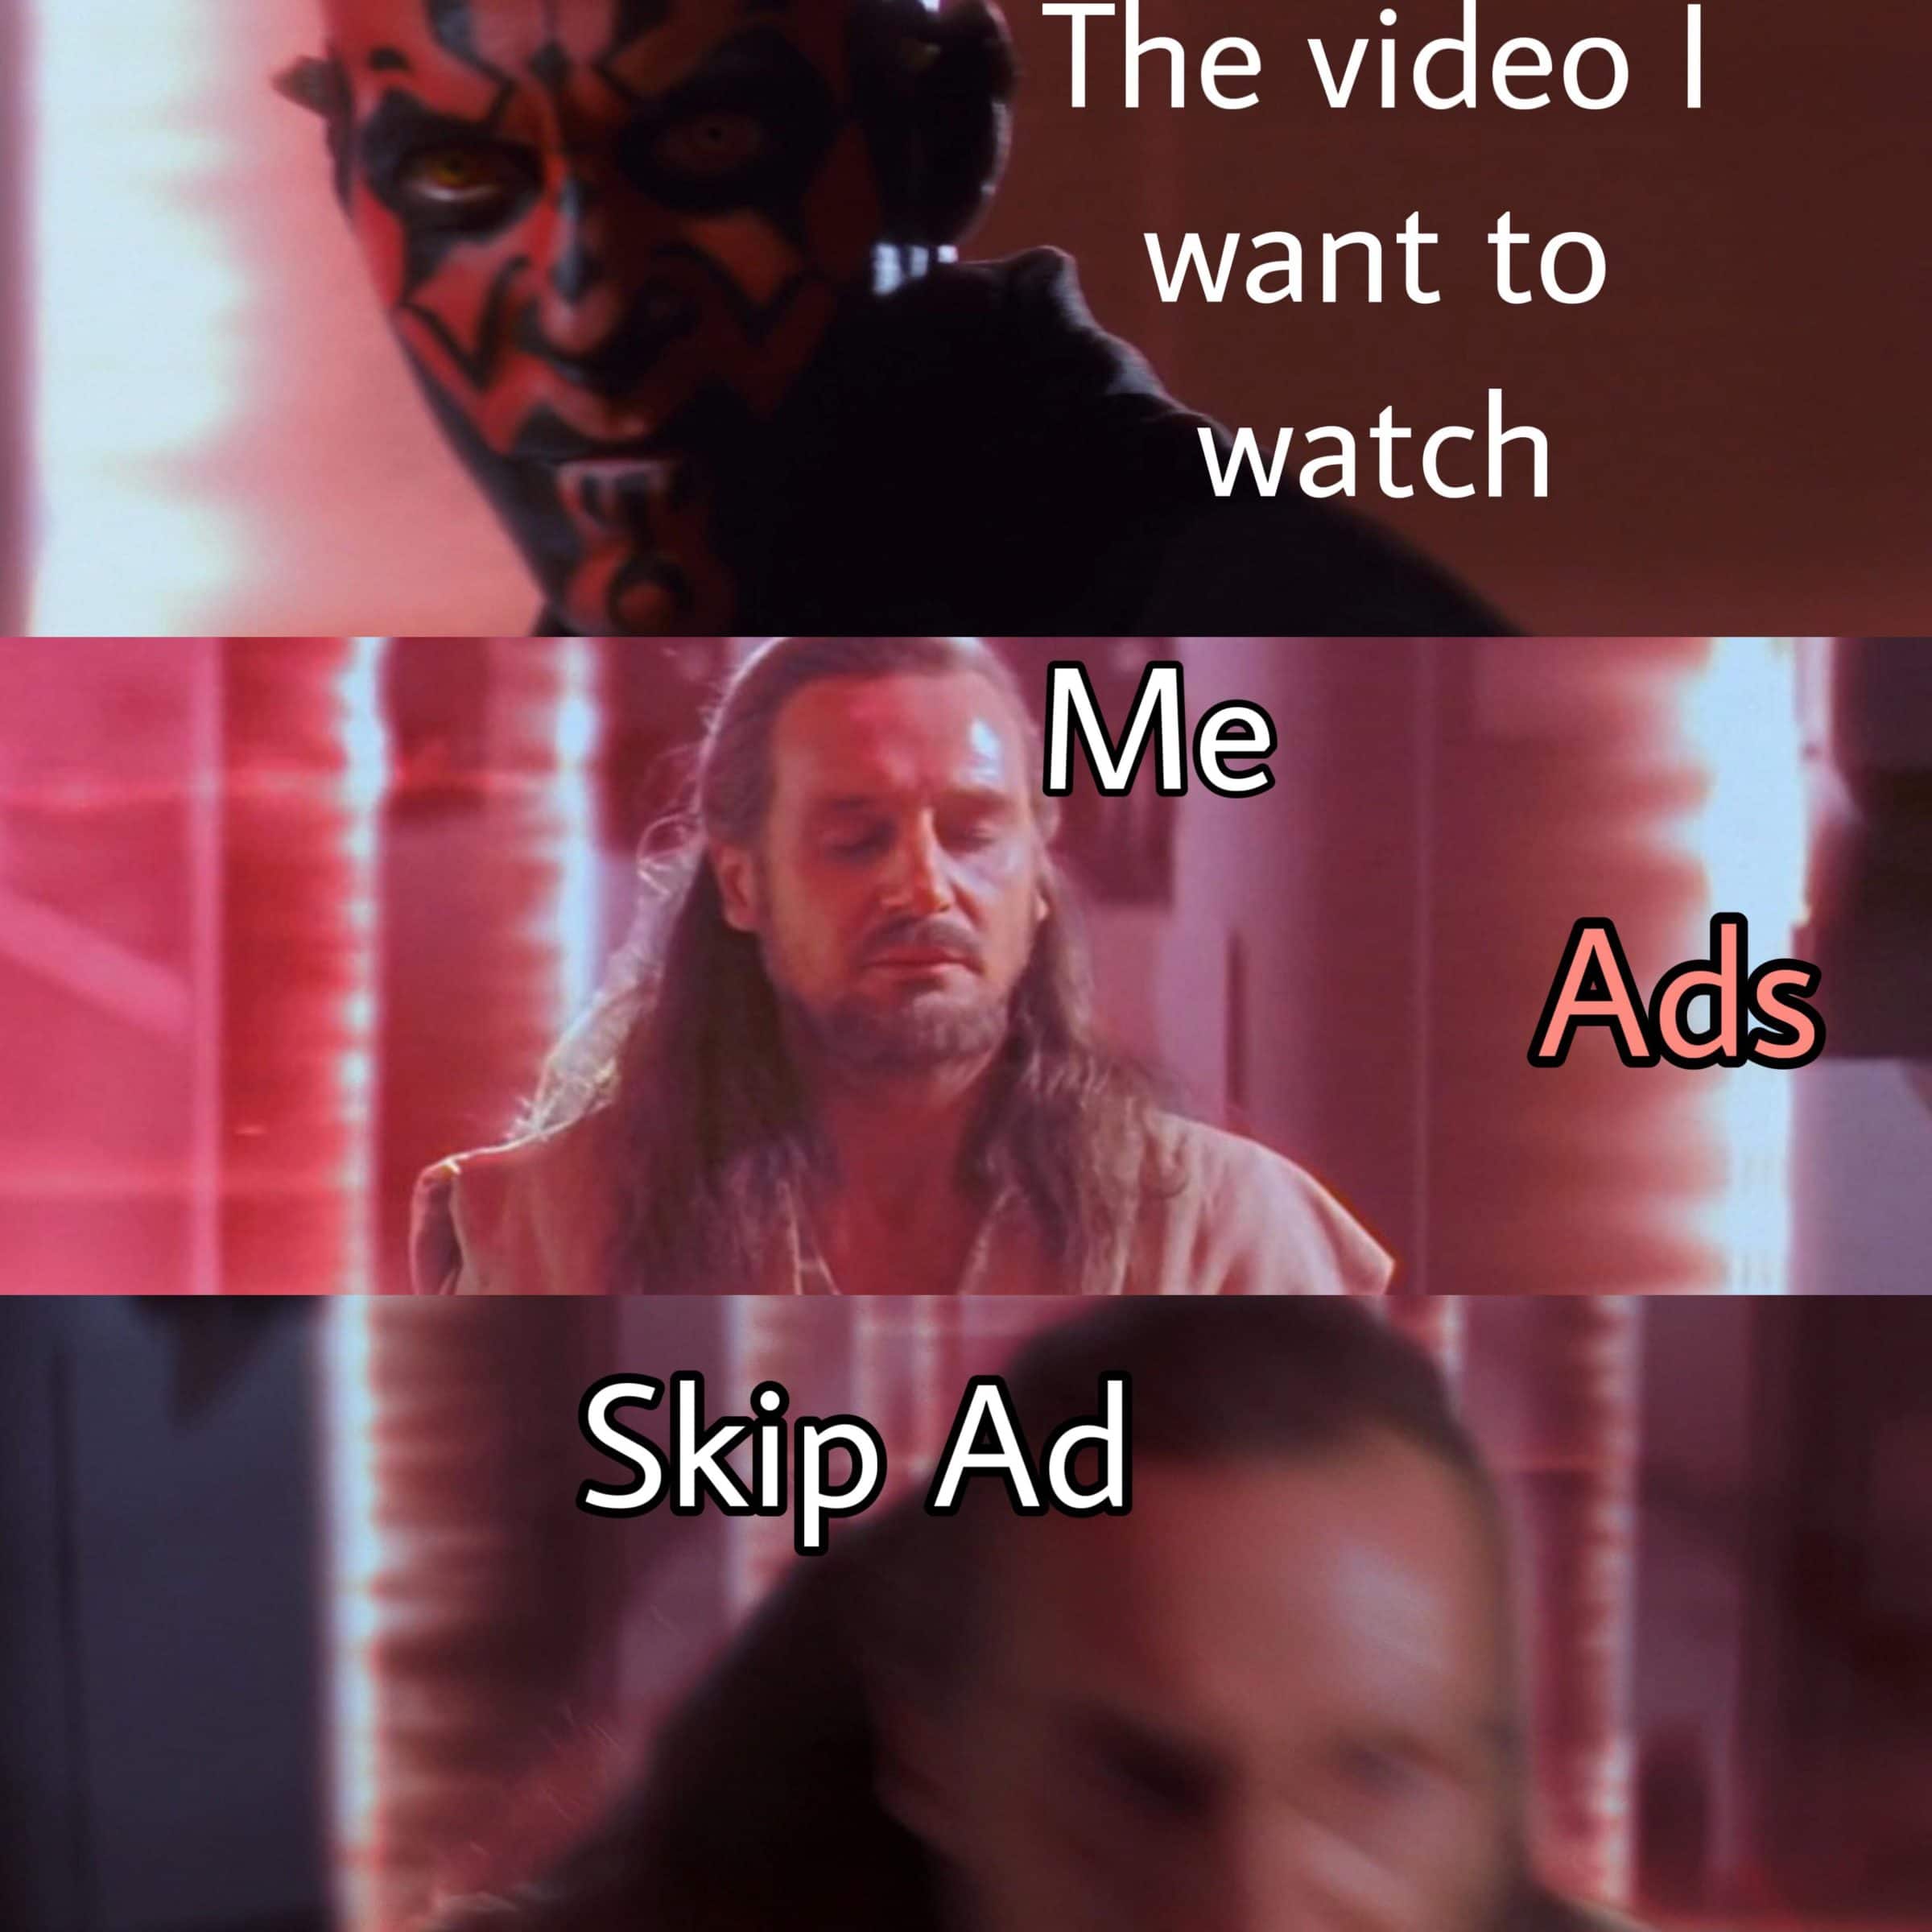 prequel-memes star-wars-memes prequel-memes text: The video I want to watch Ads Skip Ad 